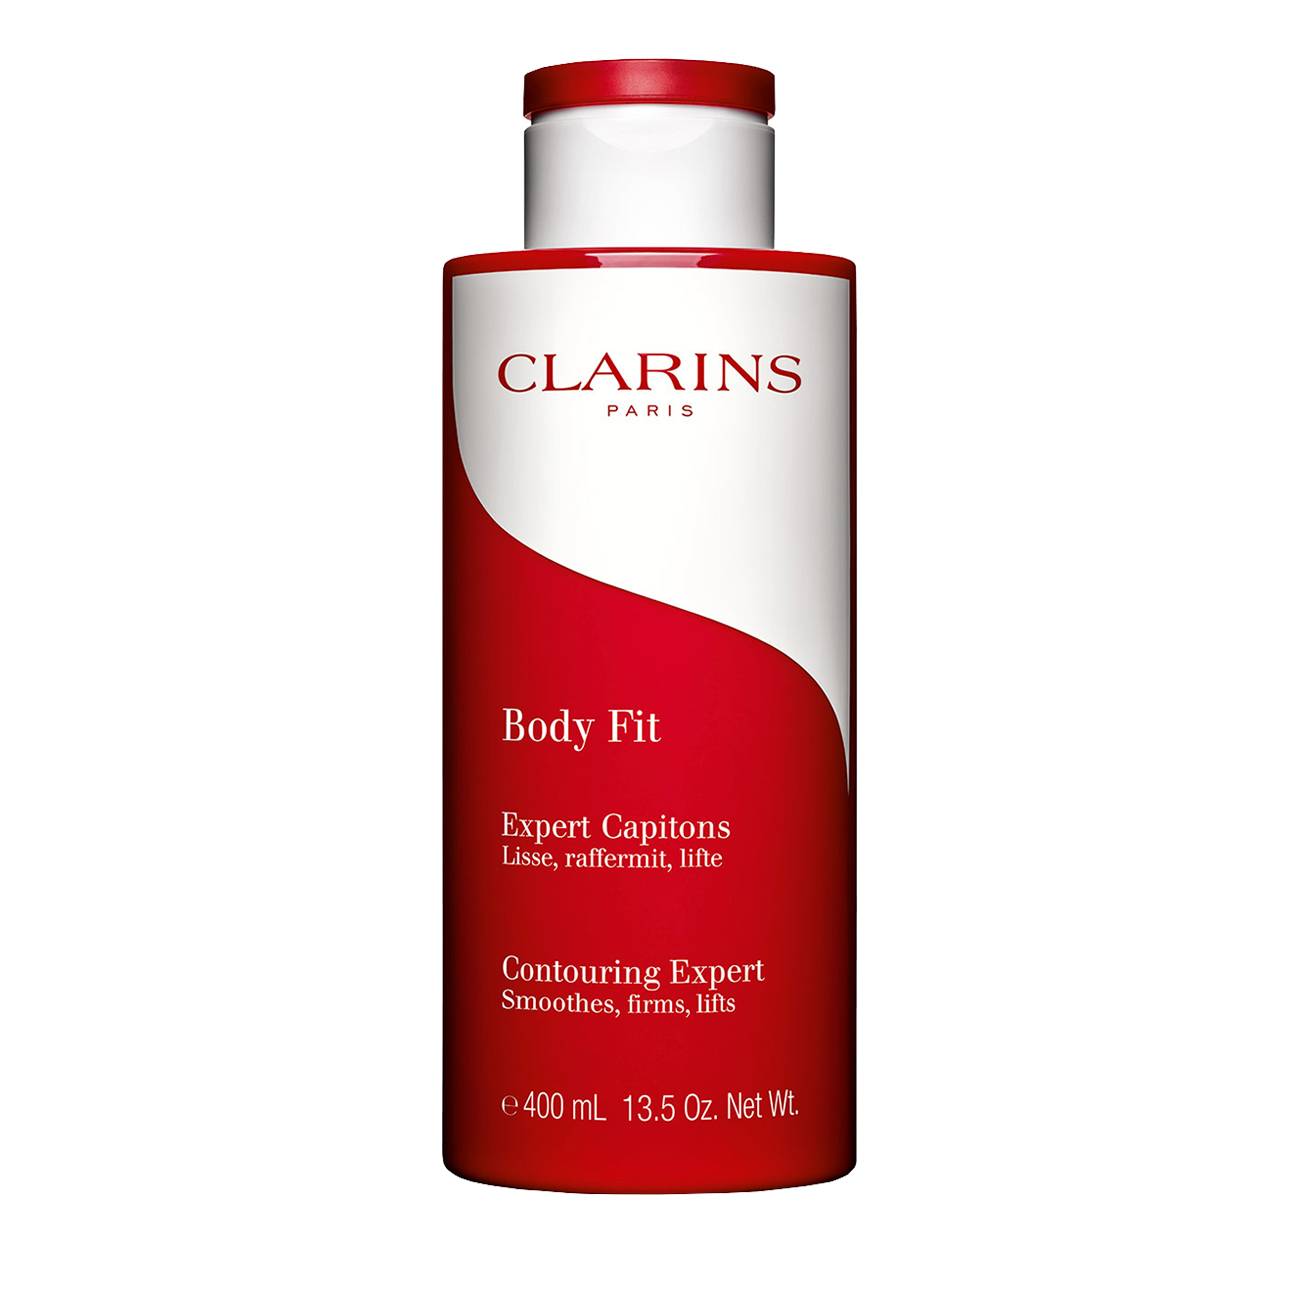 Body Fit Anti-Cellulite Contouring Expert 400 ml